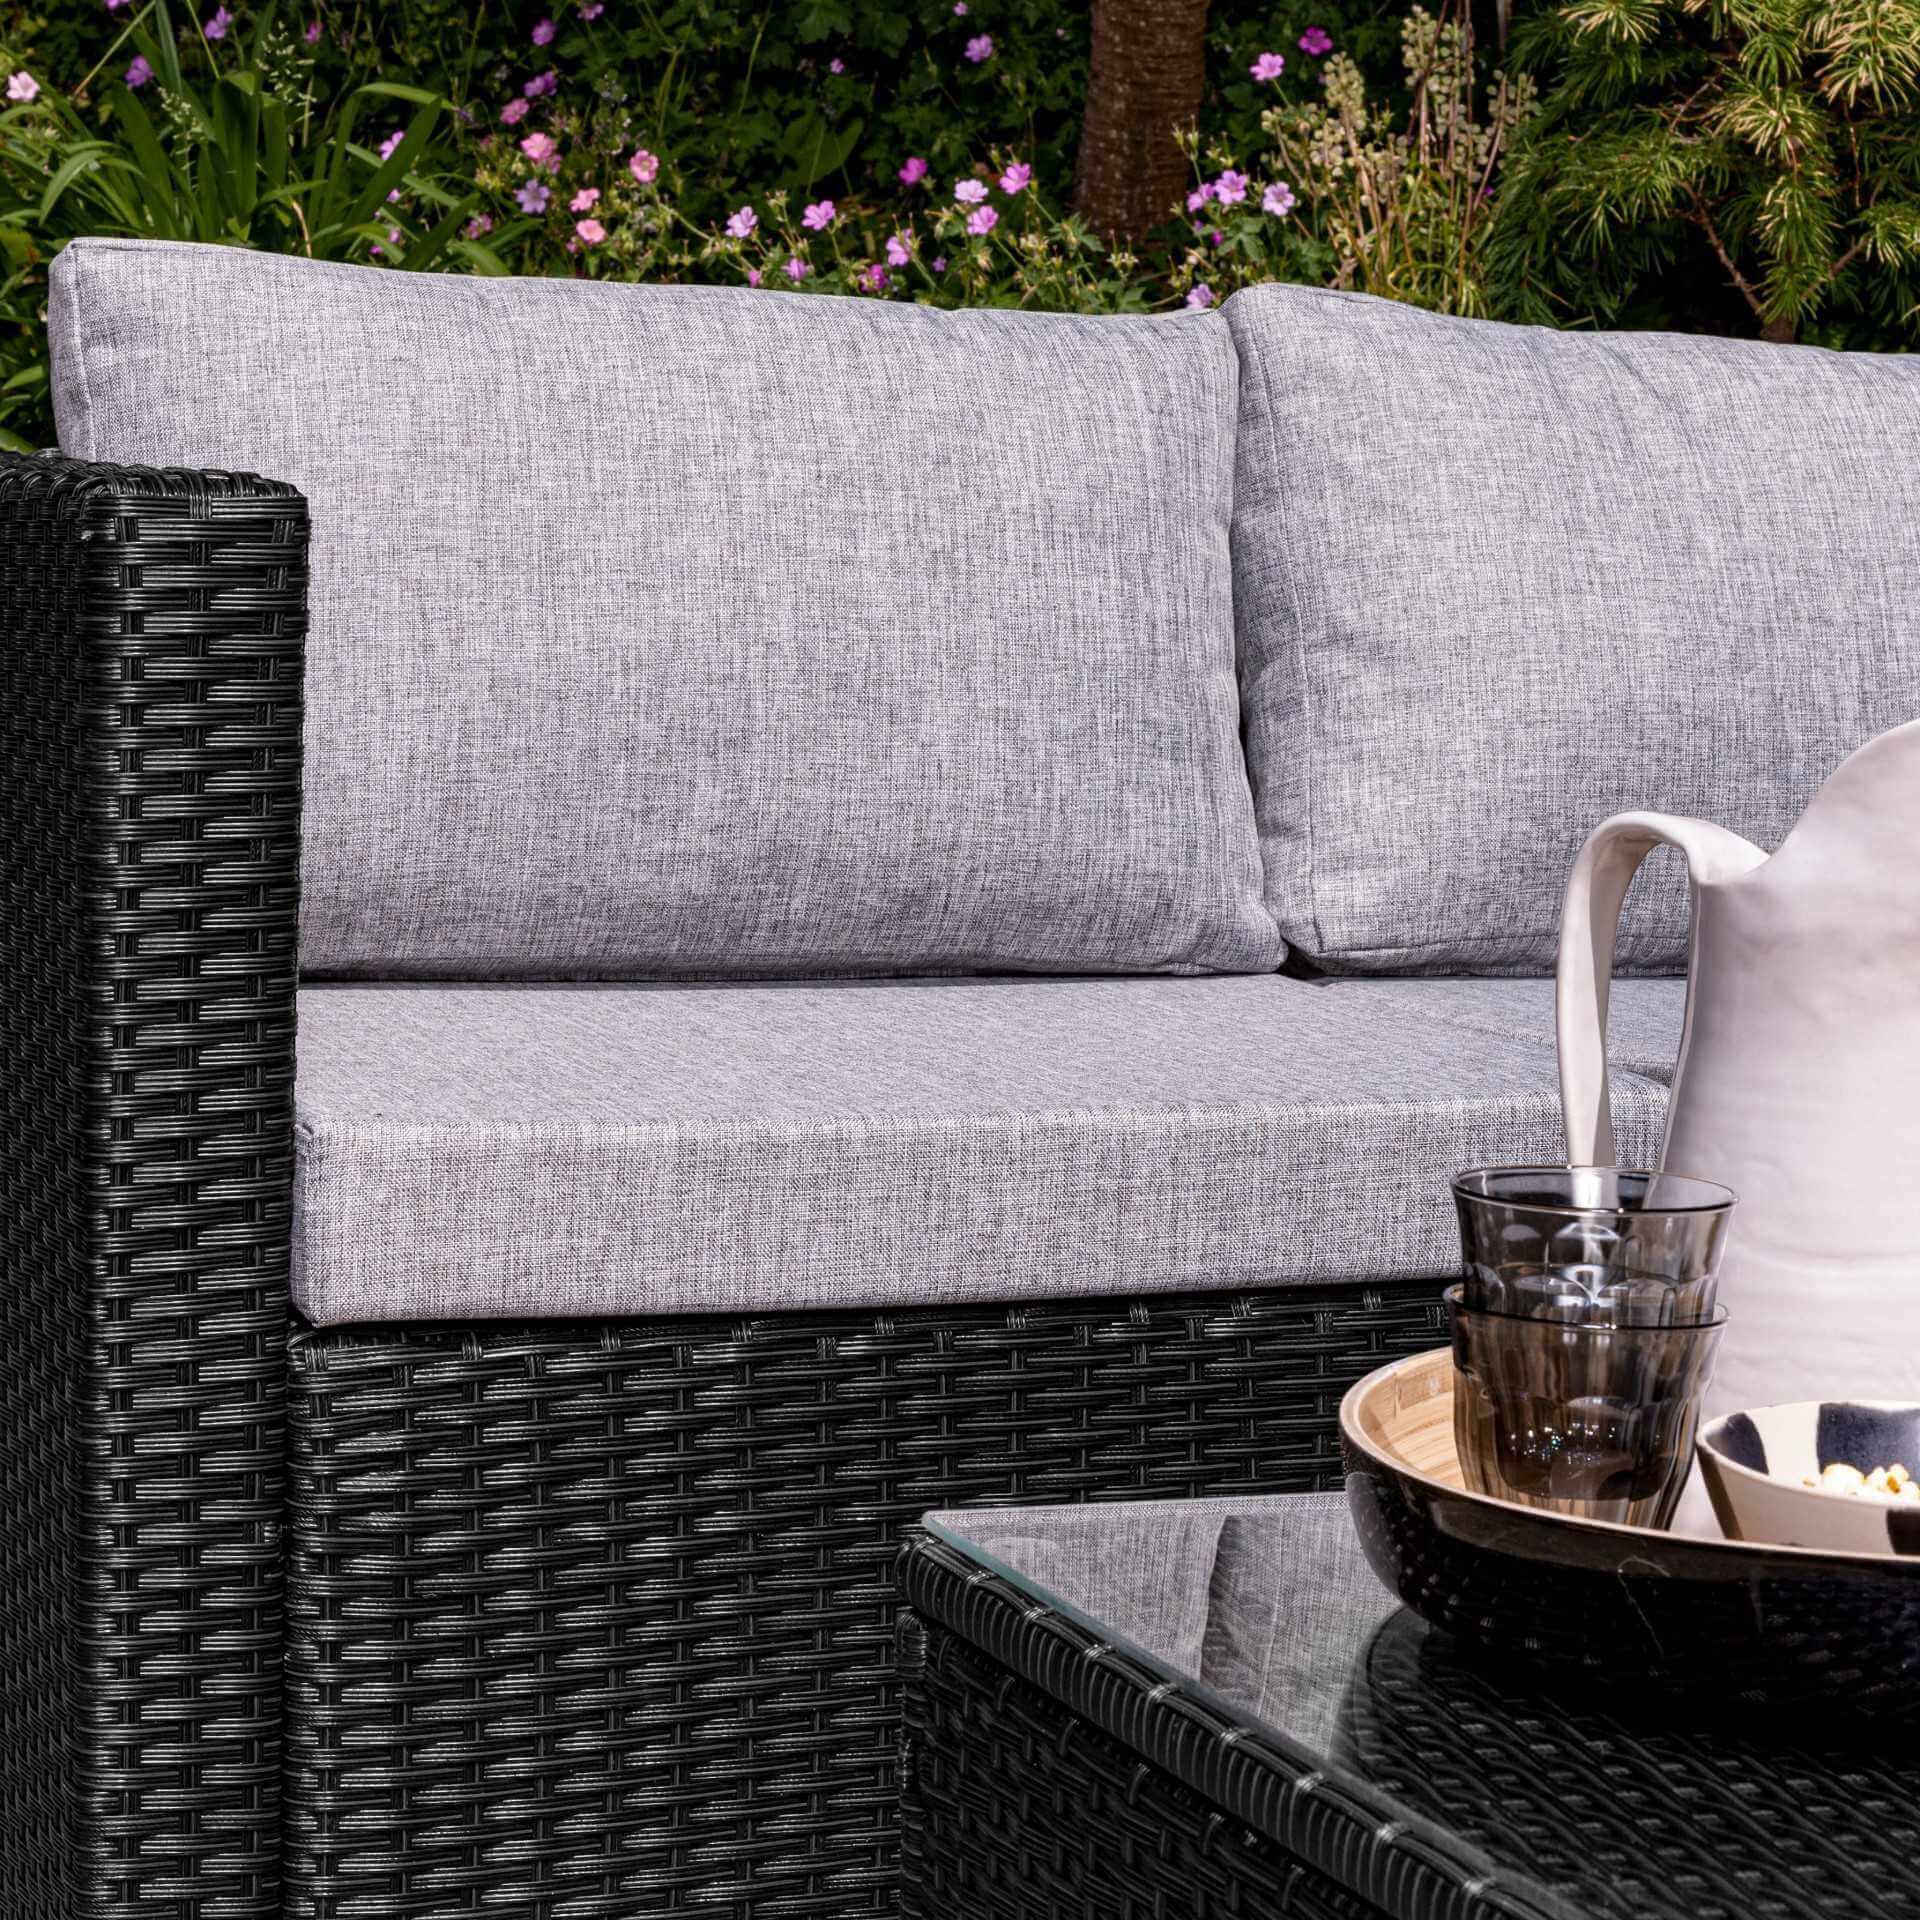 4 Seater Rattan Corner Sofa Set with Lean Over Parasol and Base - Black Weave - Laura James